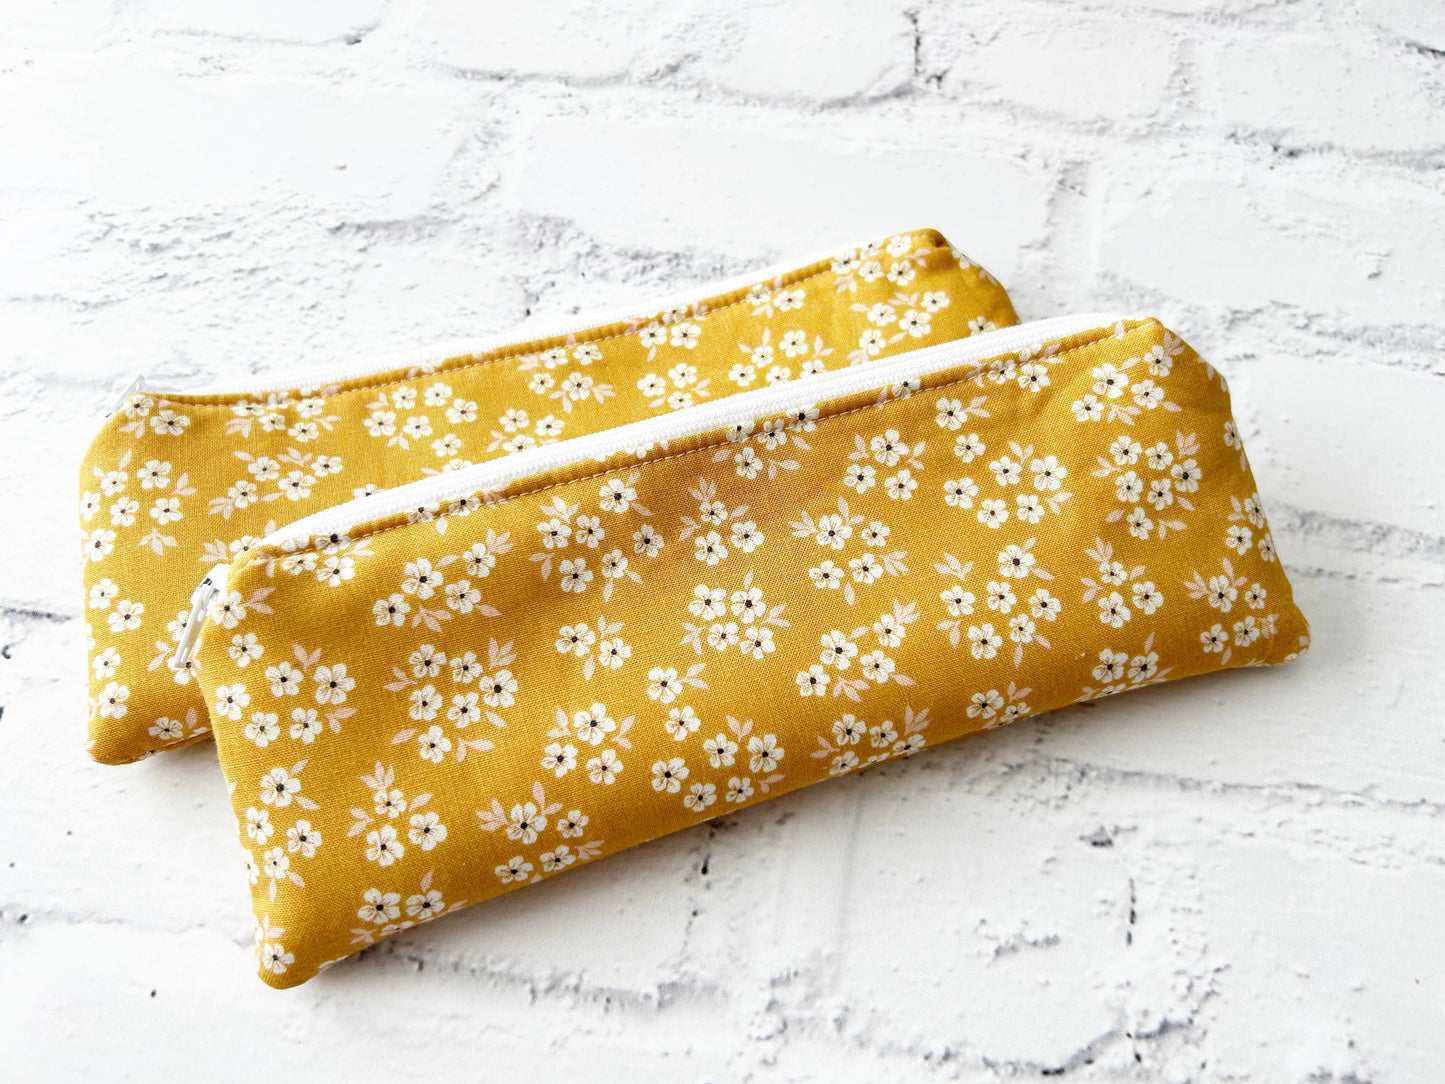 Pencil Pouch, Small Zipper Pouch, Pens Case, Back to school